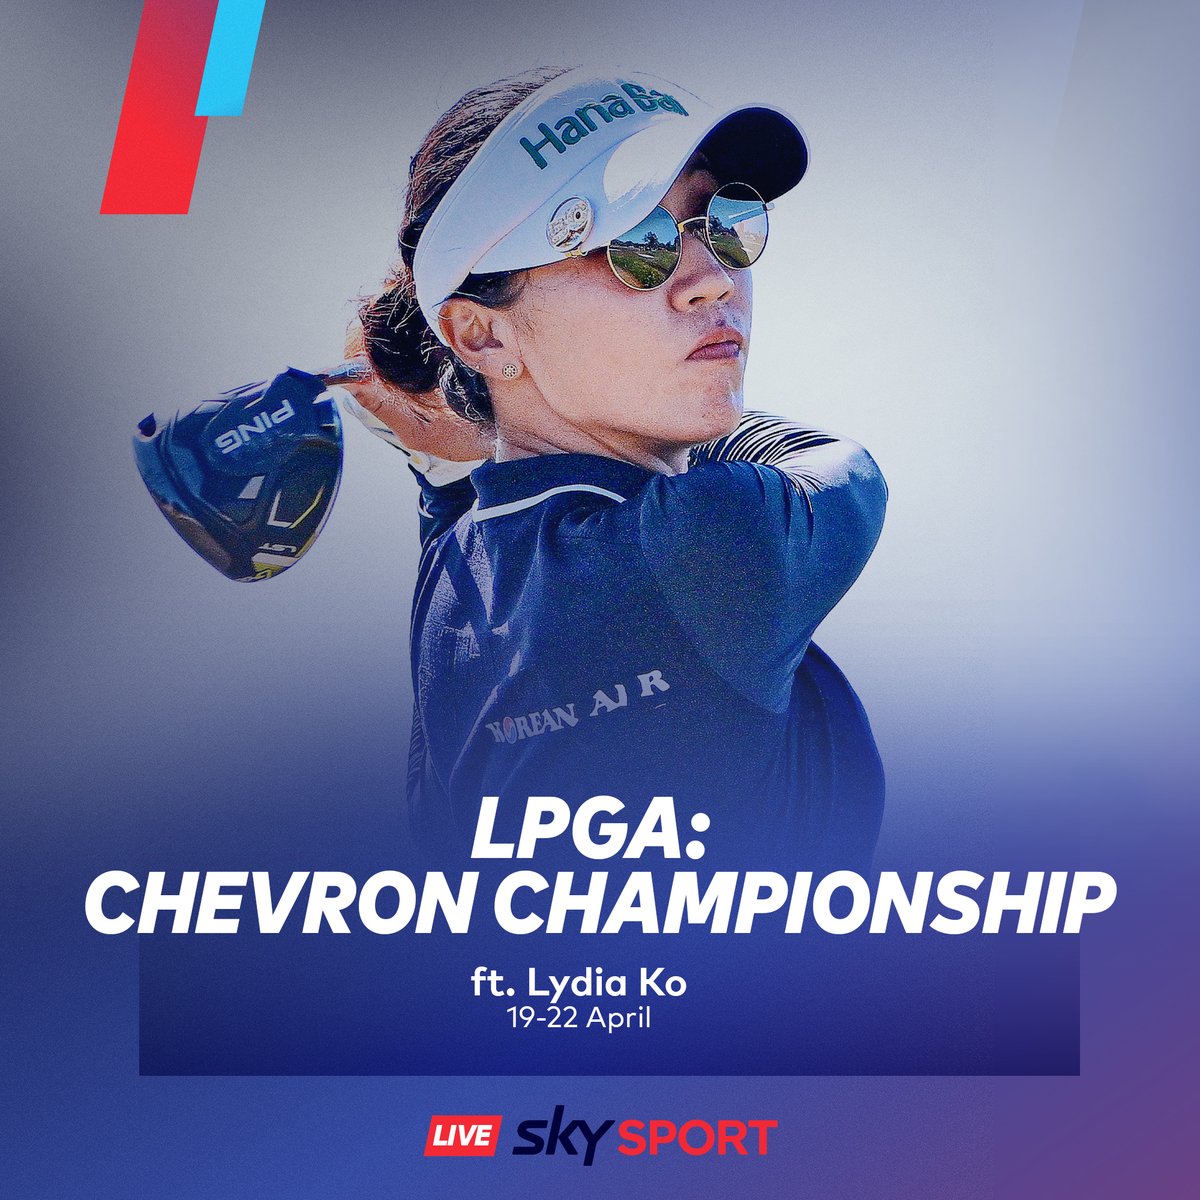 One win away from earning a place in the LPGA Hall of Fame, Lydia Ko returns to the Chevron Championship this week ⛳ At the tournament where she became the youngest two-time major winner in #LPGA history back in 2016 - can Lydia make history once again? 👀 LIVE on #SkySportNZ